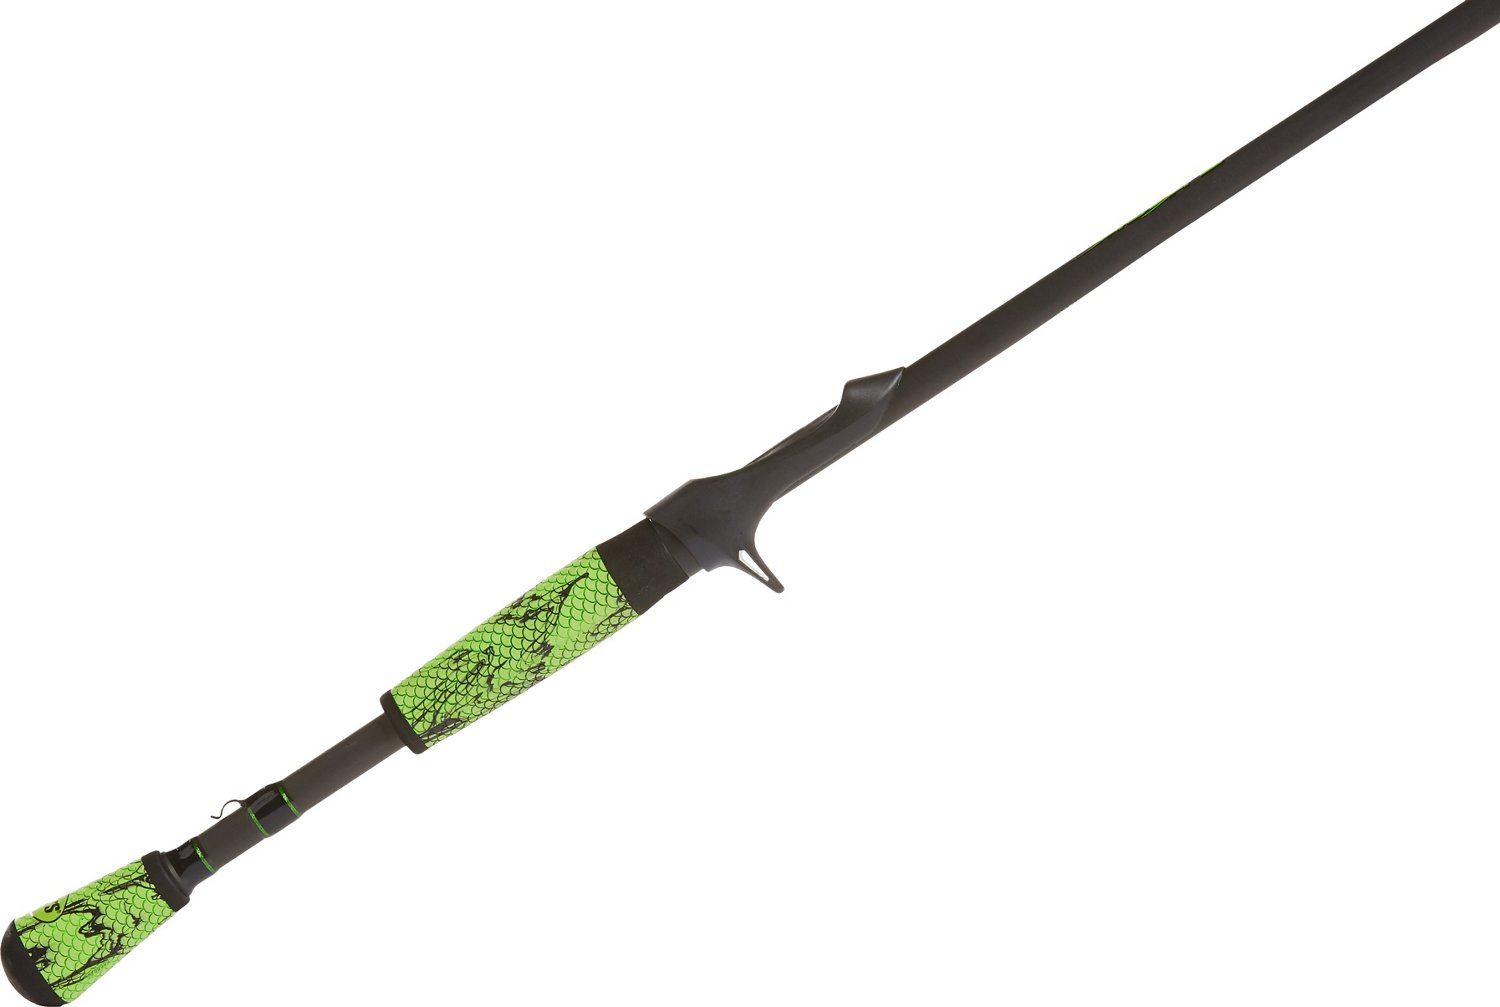 Academy Sports + Outdoors Lew's Mach 2 Casting Rod